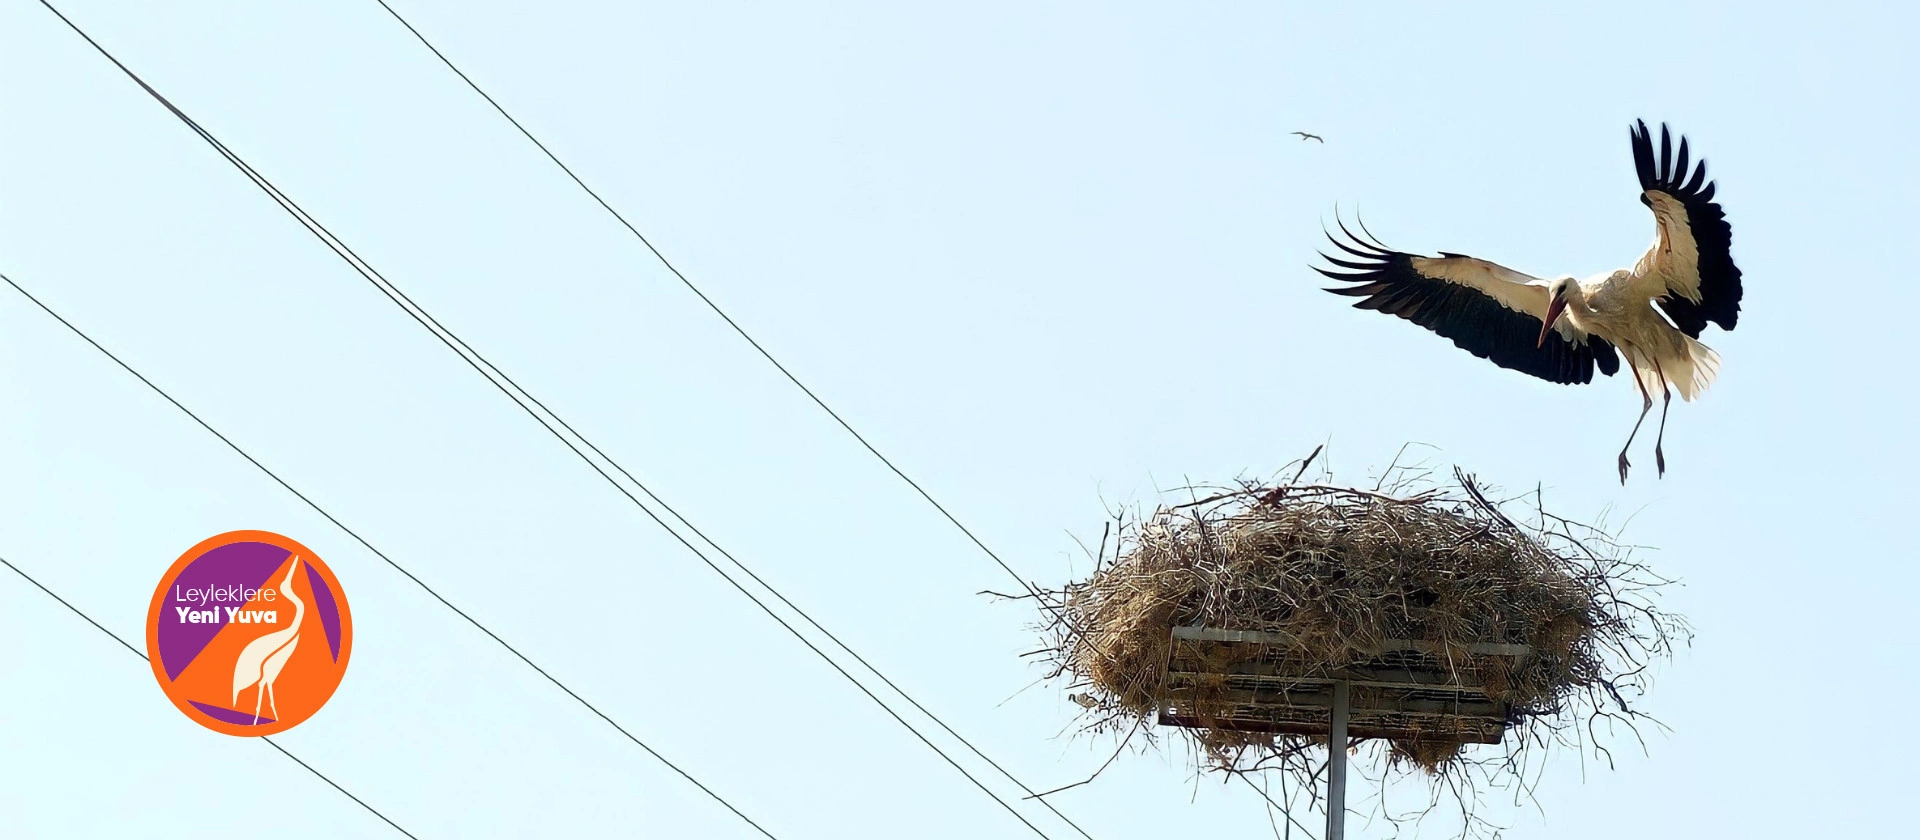 A New Home for Storks